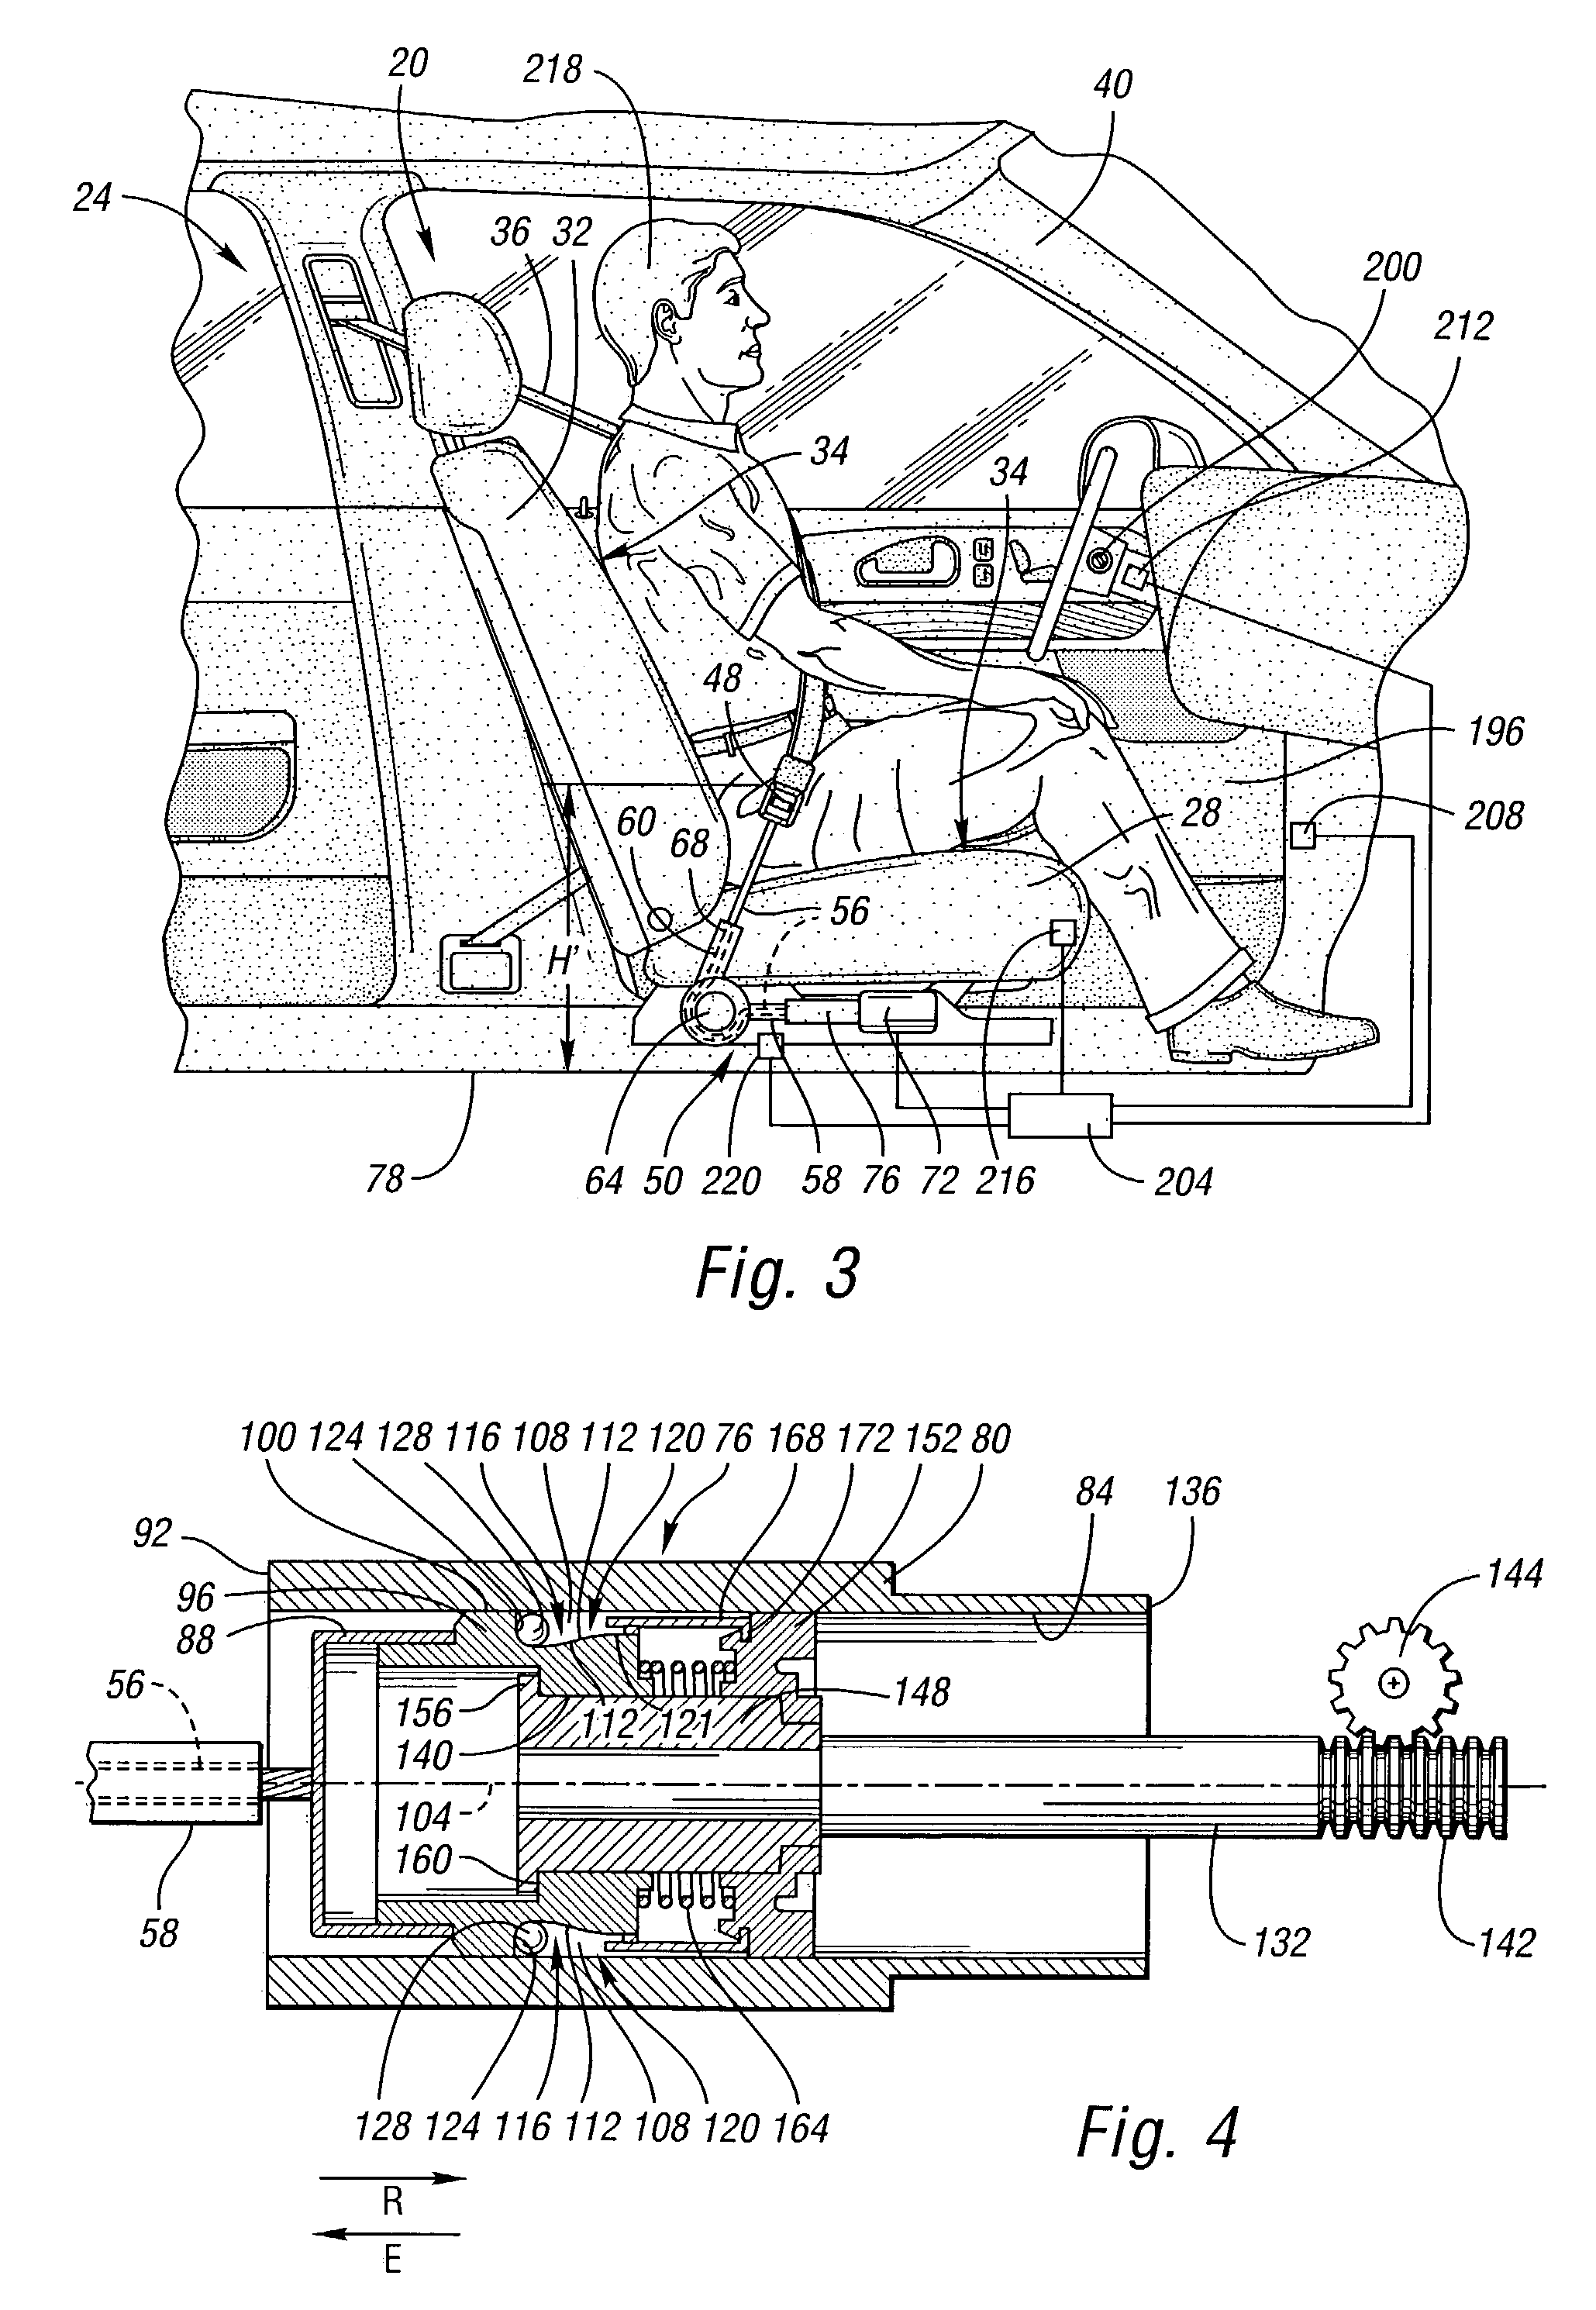 Seat belt buckle presenter and method of use therefor